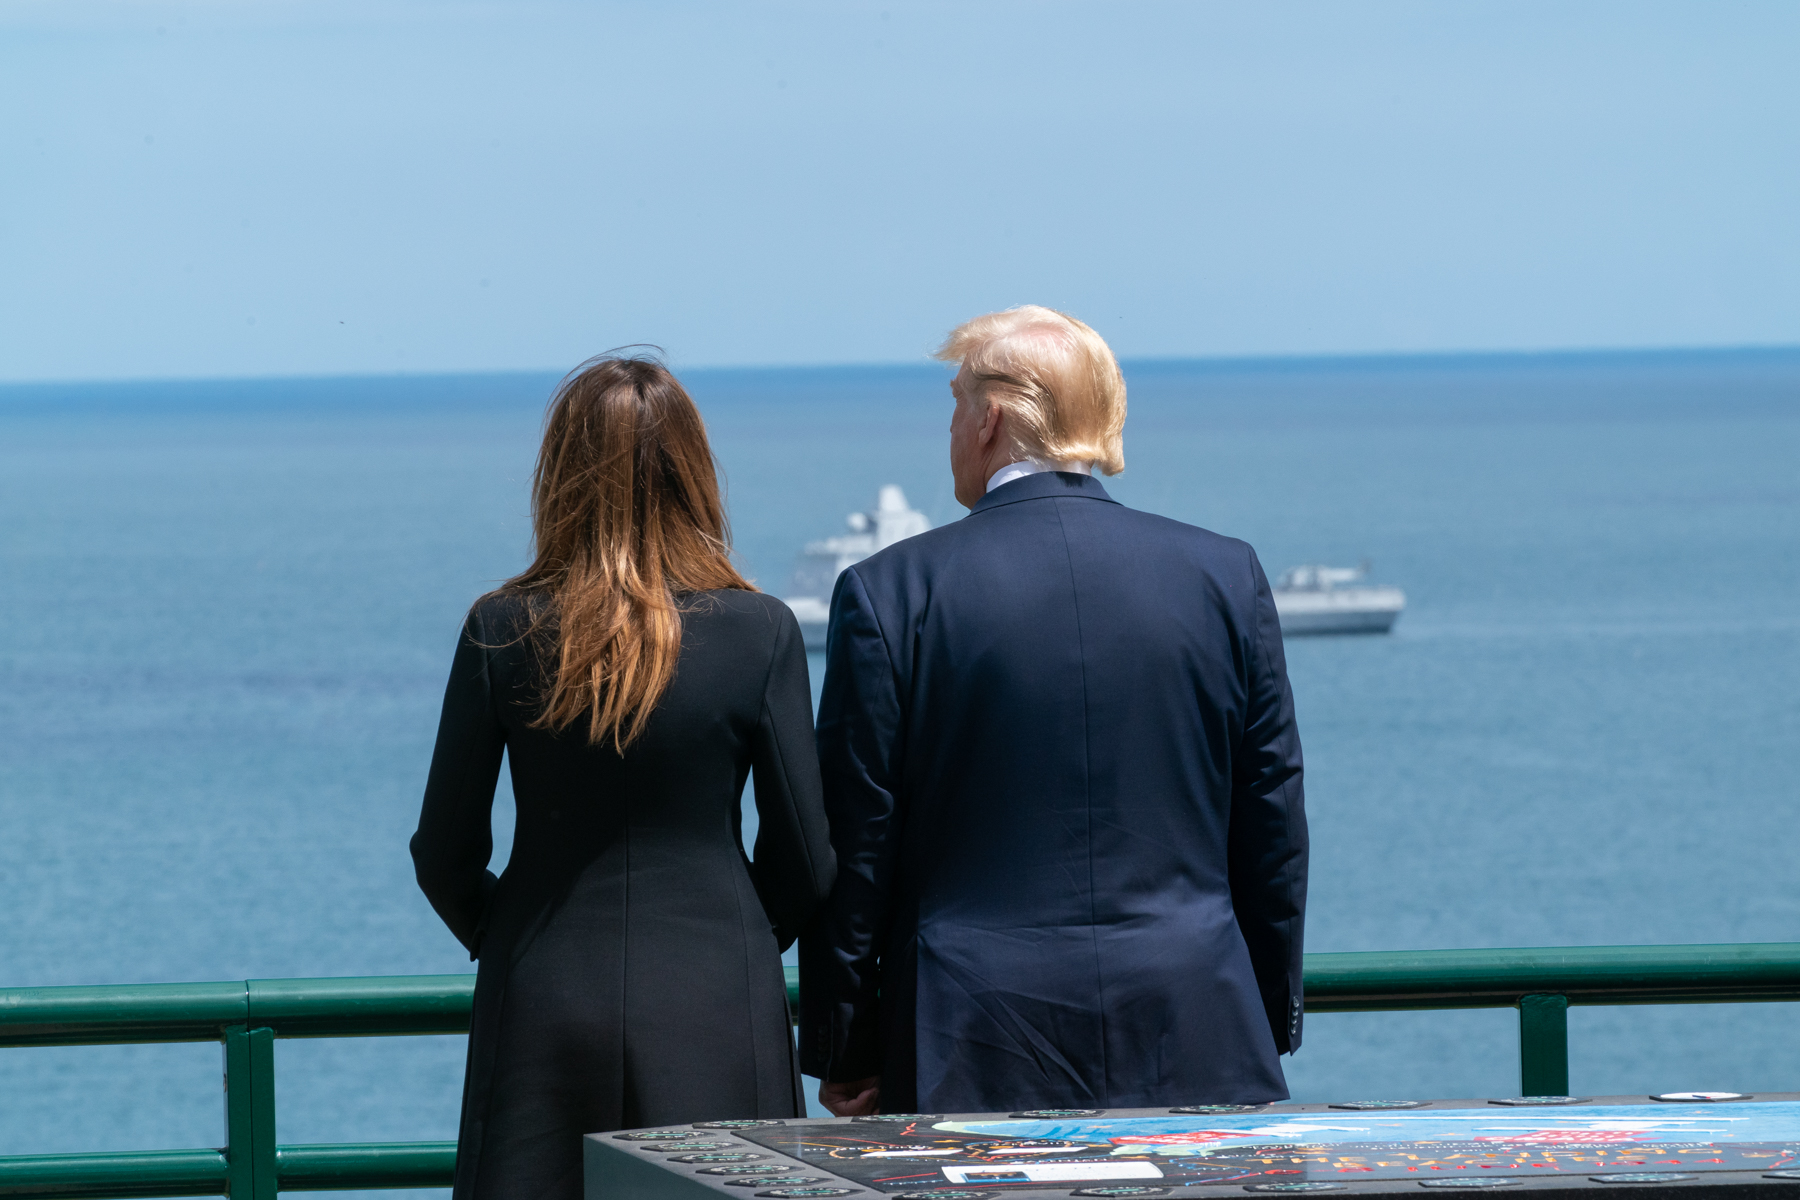 President Donald J. Trump and First Lady Melania Trump stand on the Omaha Beach overlook during the 75th Commemoration of D-Day Thursday, June 6, 2019, at the Normandy American Cemetery in Normandy, France. (Official White House Photo by Andrea Hanks)